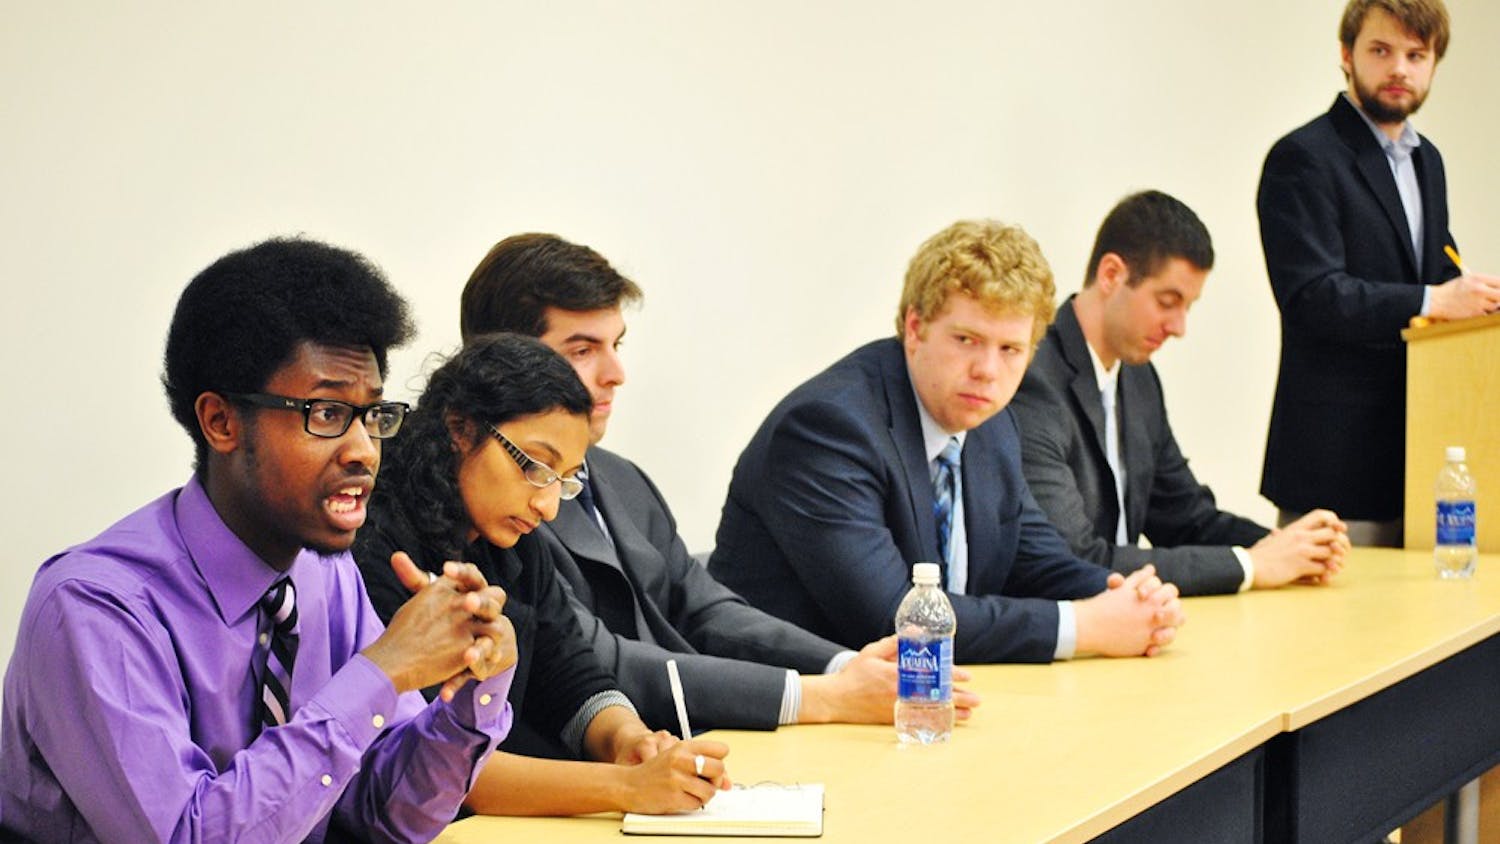 The Daily Tar Heel hosted a debate between the candidates for the Student Body President position. The candidates went over a variety of topics concerning their goals and reasons for becoming Student Body President. 